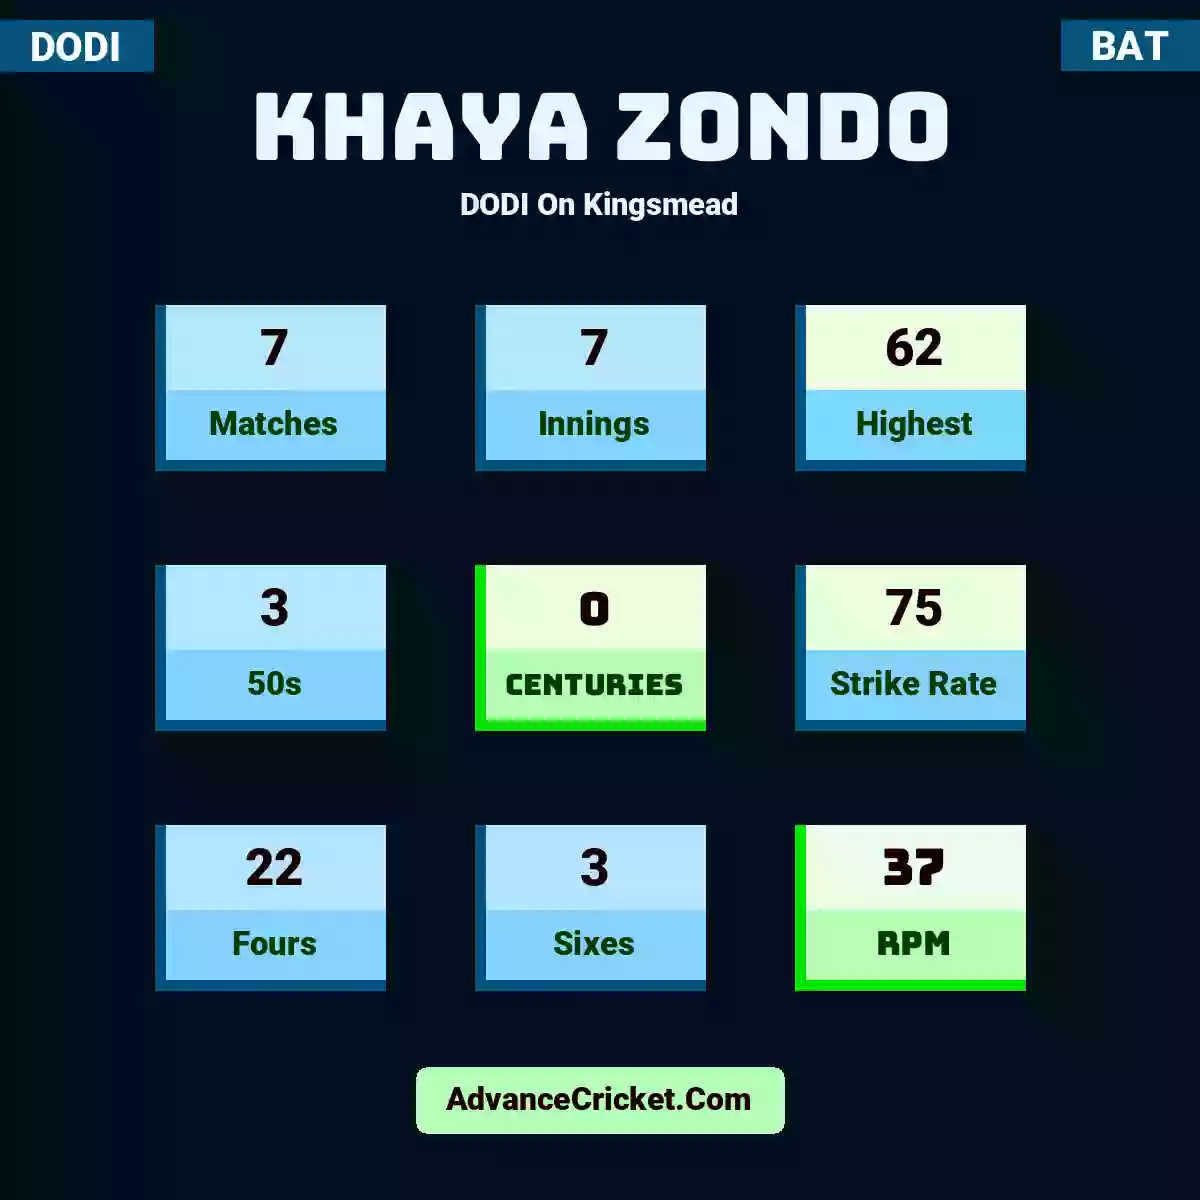 Khaya Zondo DODI  On Kingsmead, Khaya Zondo played 7 matches, scored 62 runs as highest, 3 half-centuries, and 0 centuries, with a strike rate of 75. K.Zondo hit 22 fours and 3 sixes, with an RPM of 37.